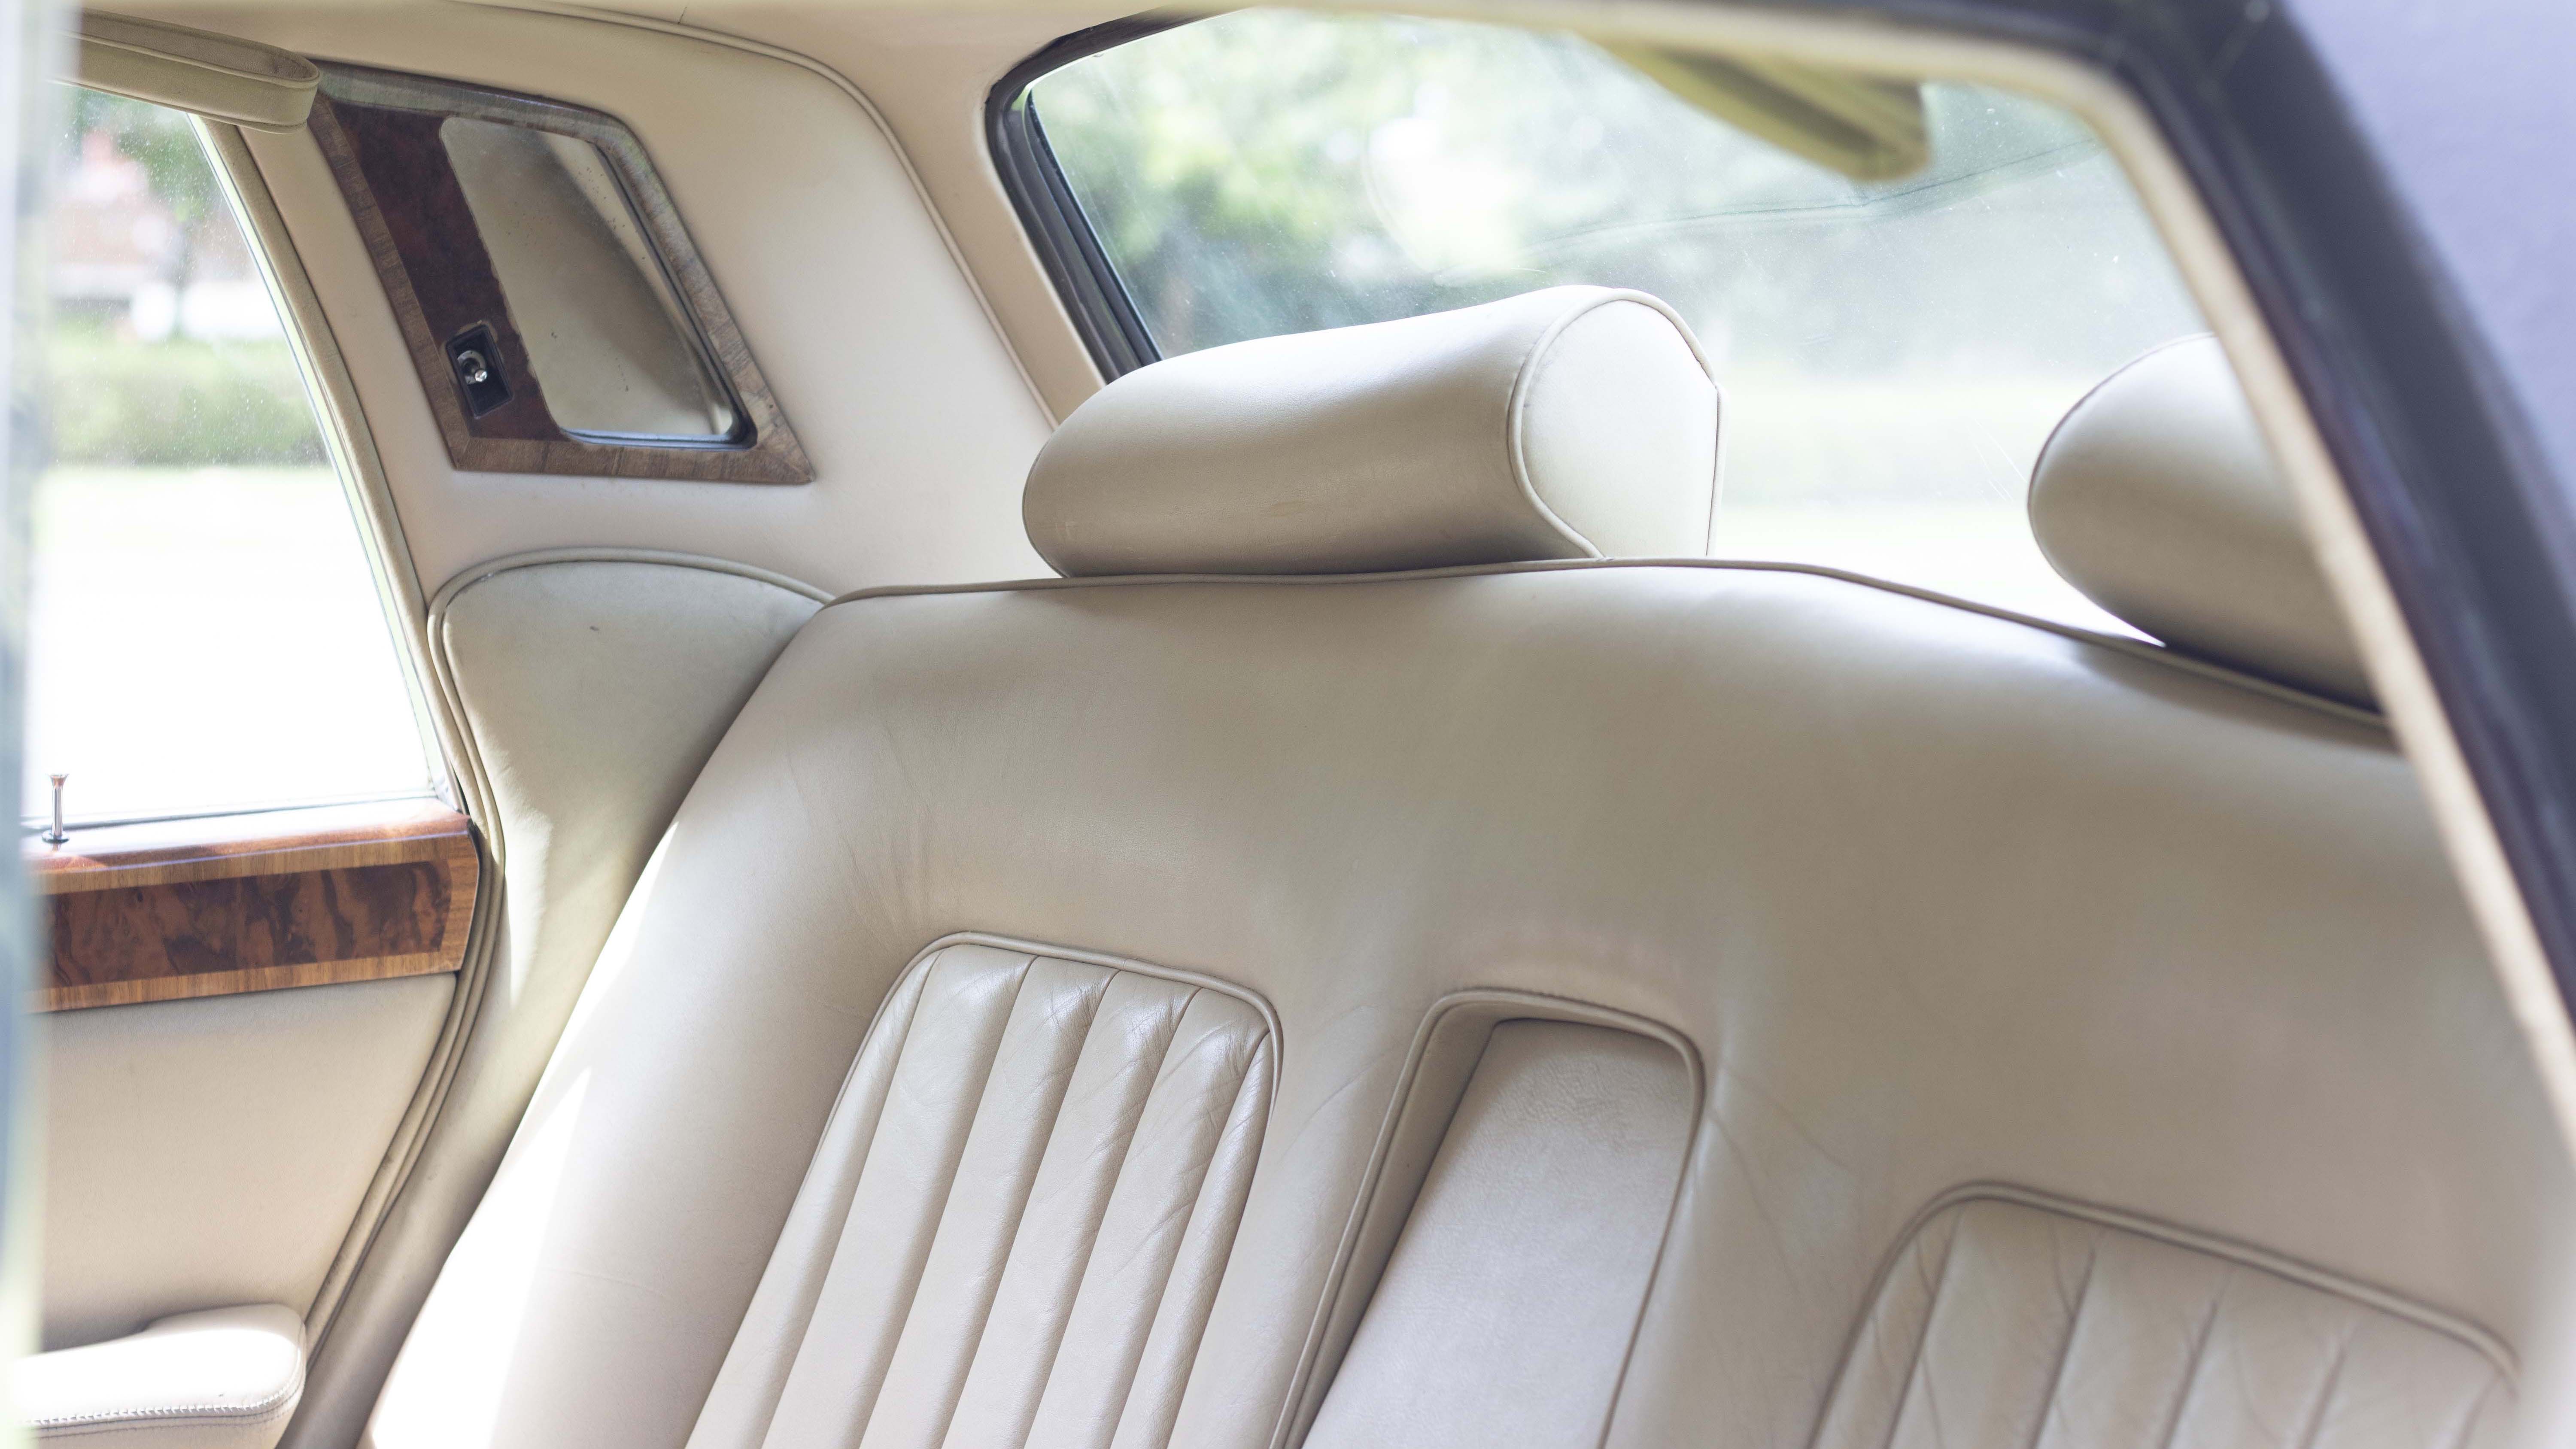 cream leather interior and vanity mirror in the rear of Classic Rolls-Royce silver shadow